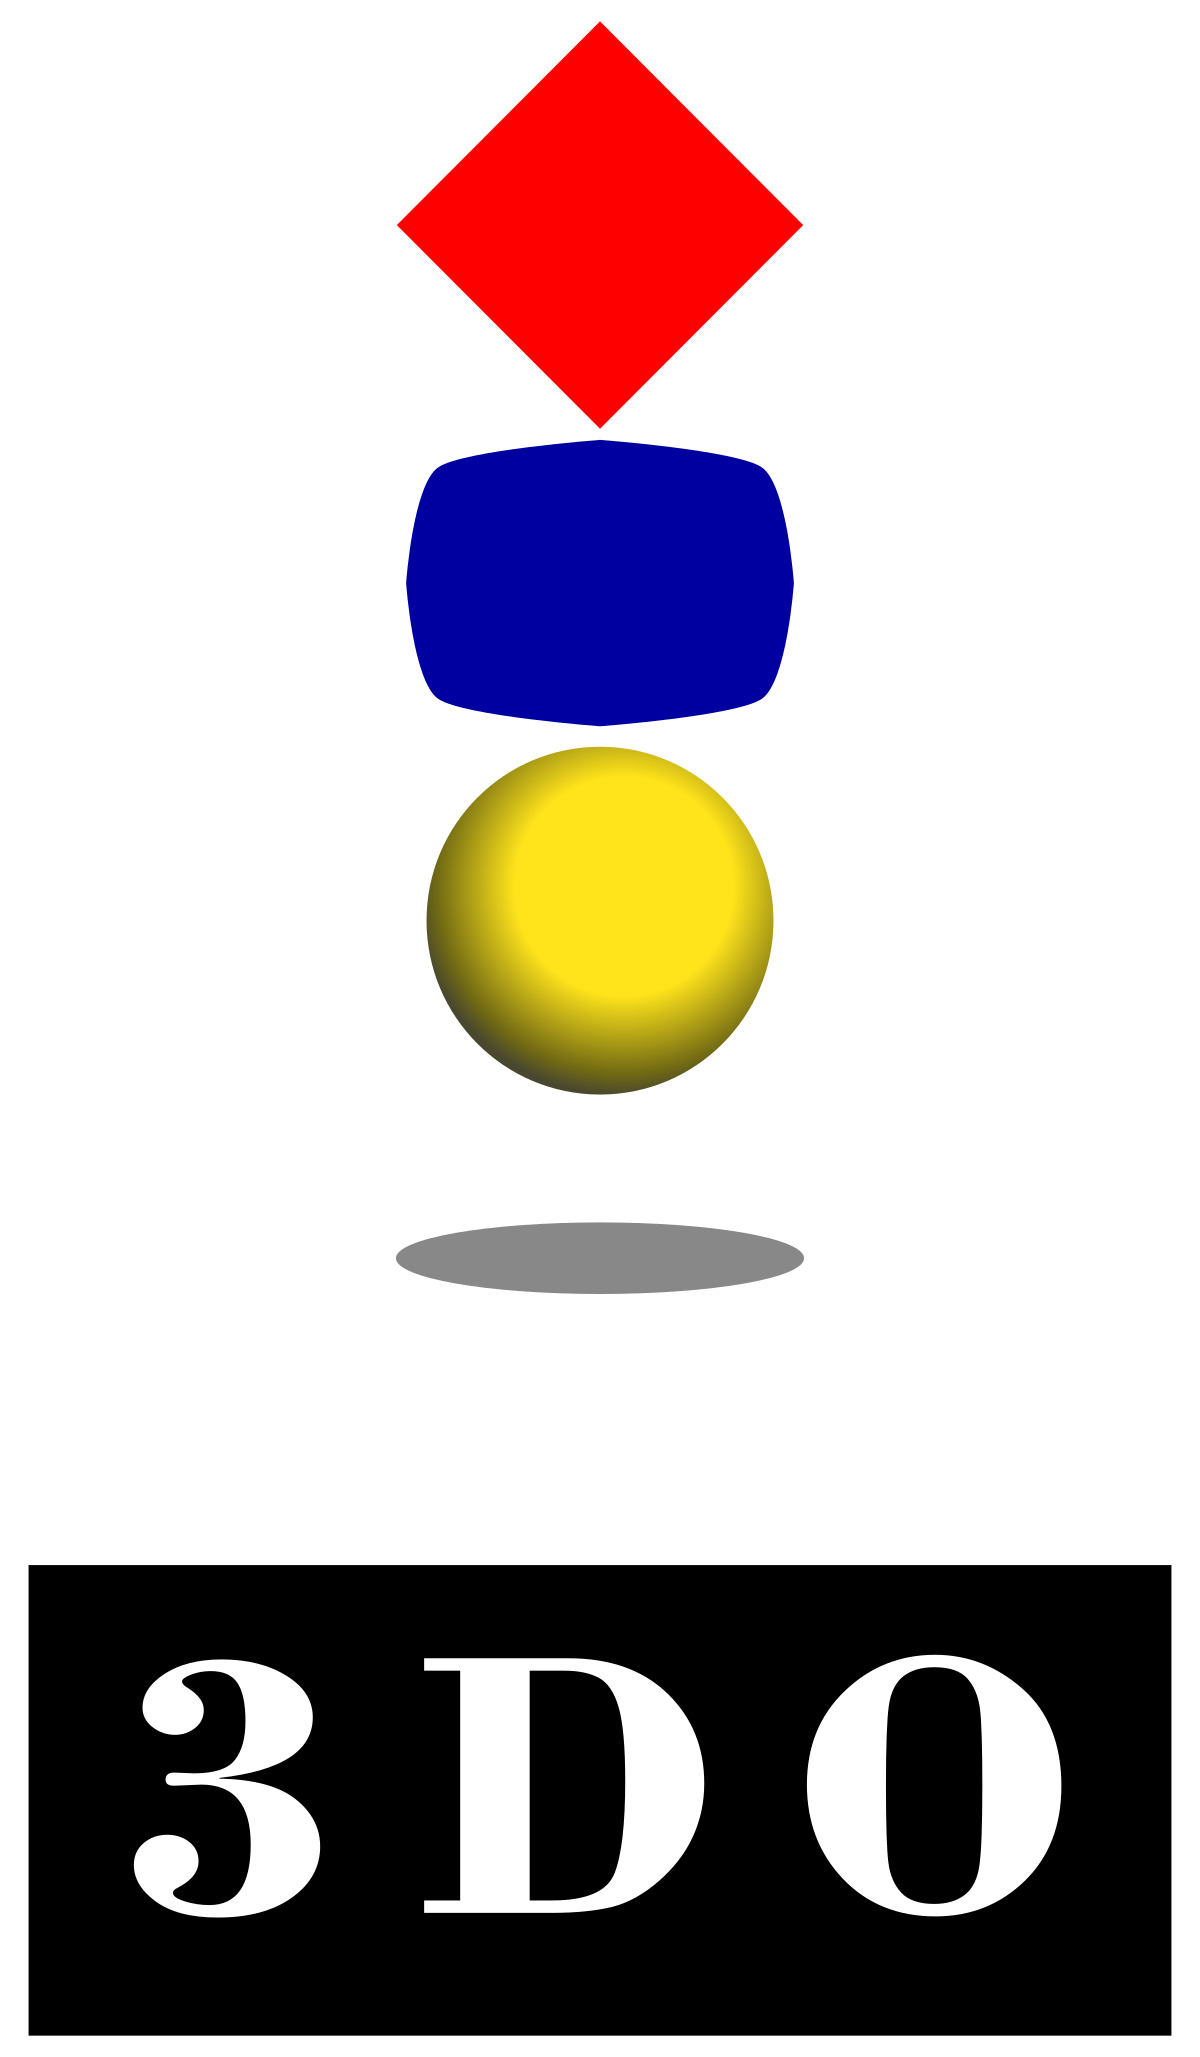 Download File:3DO Logo.svg - Wikimedia Commons